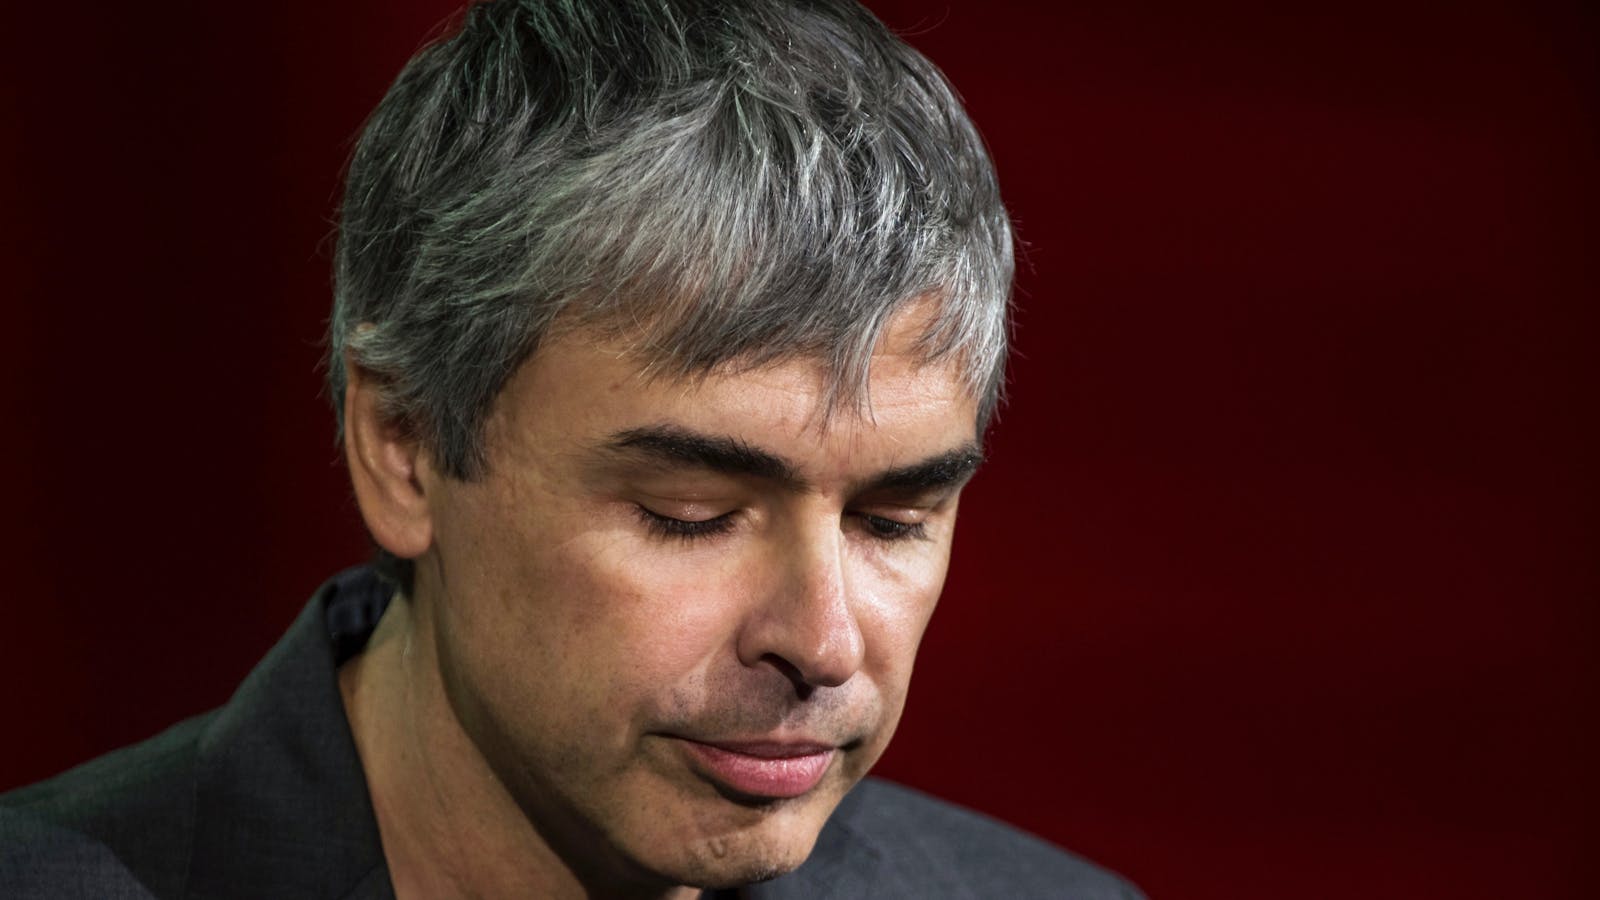 Alphabet CEO Larry Page. Photo by Bloomberg.